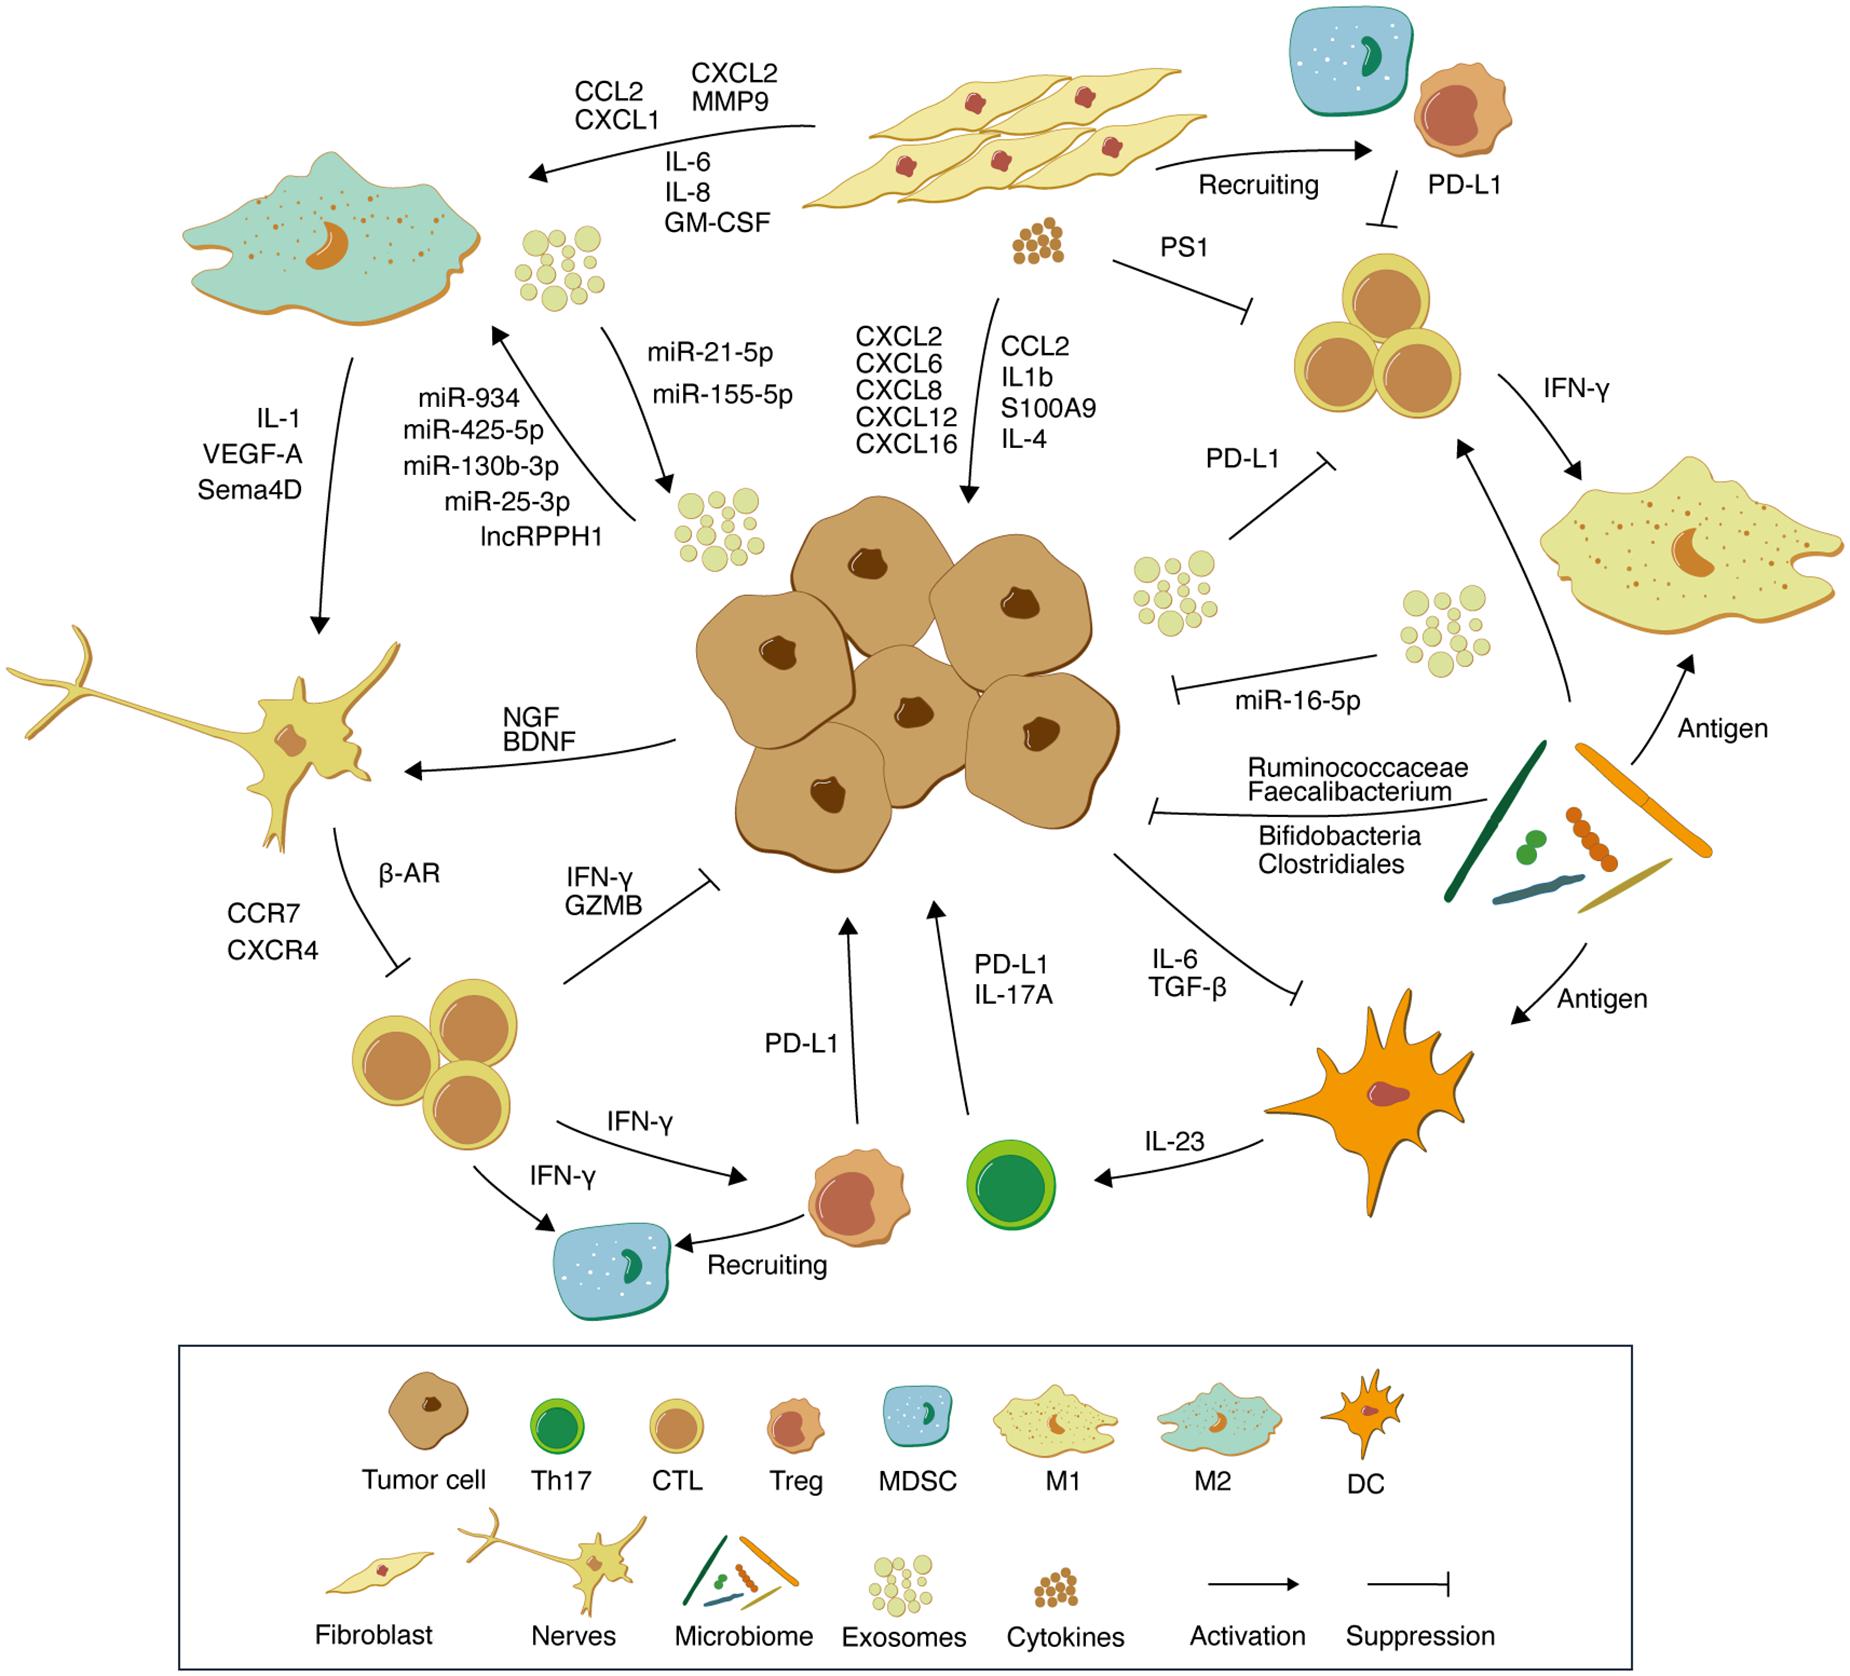 Frontiers | Non-immune Cell Components in the Gastrointestinal 